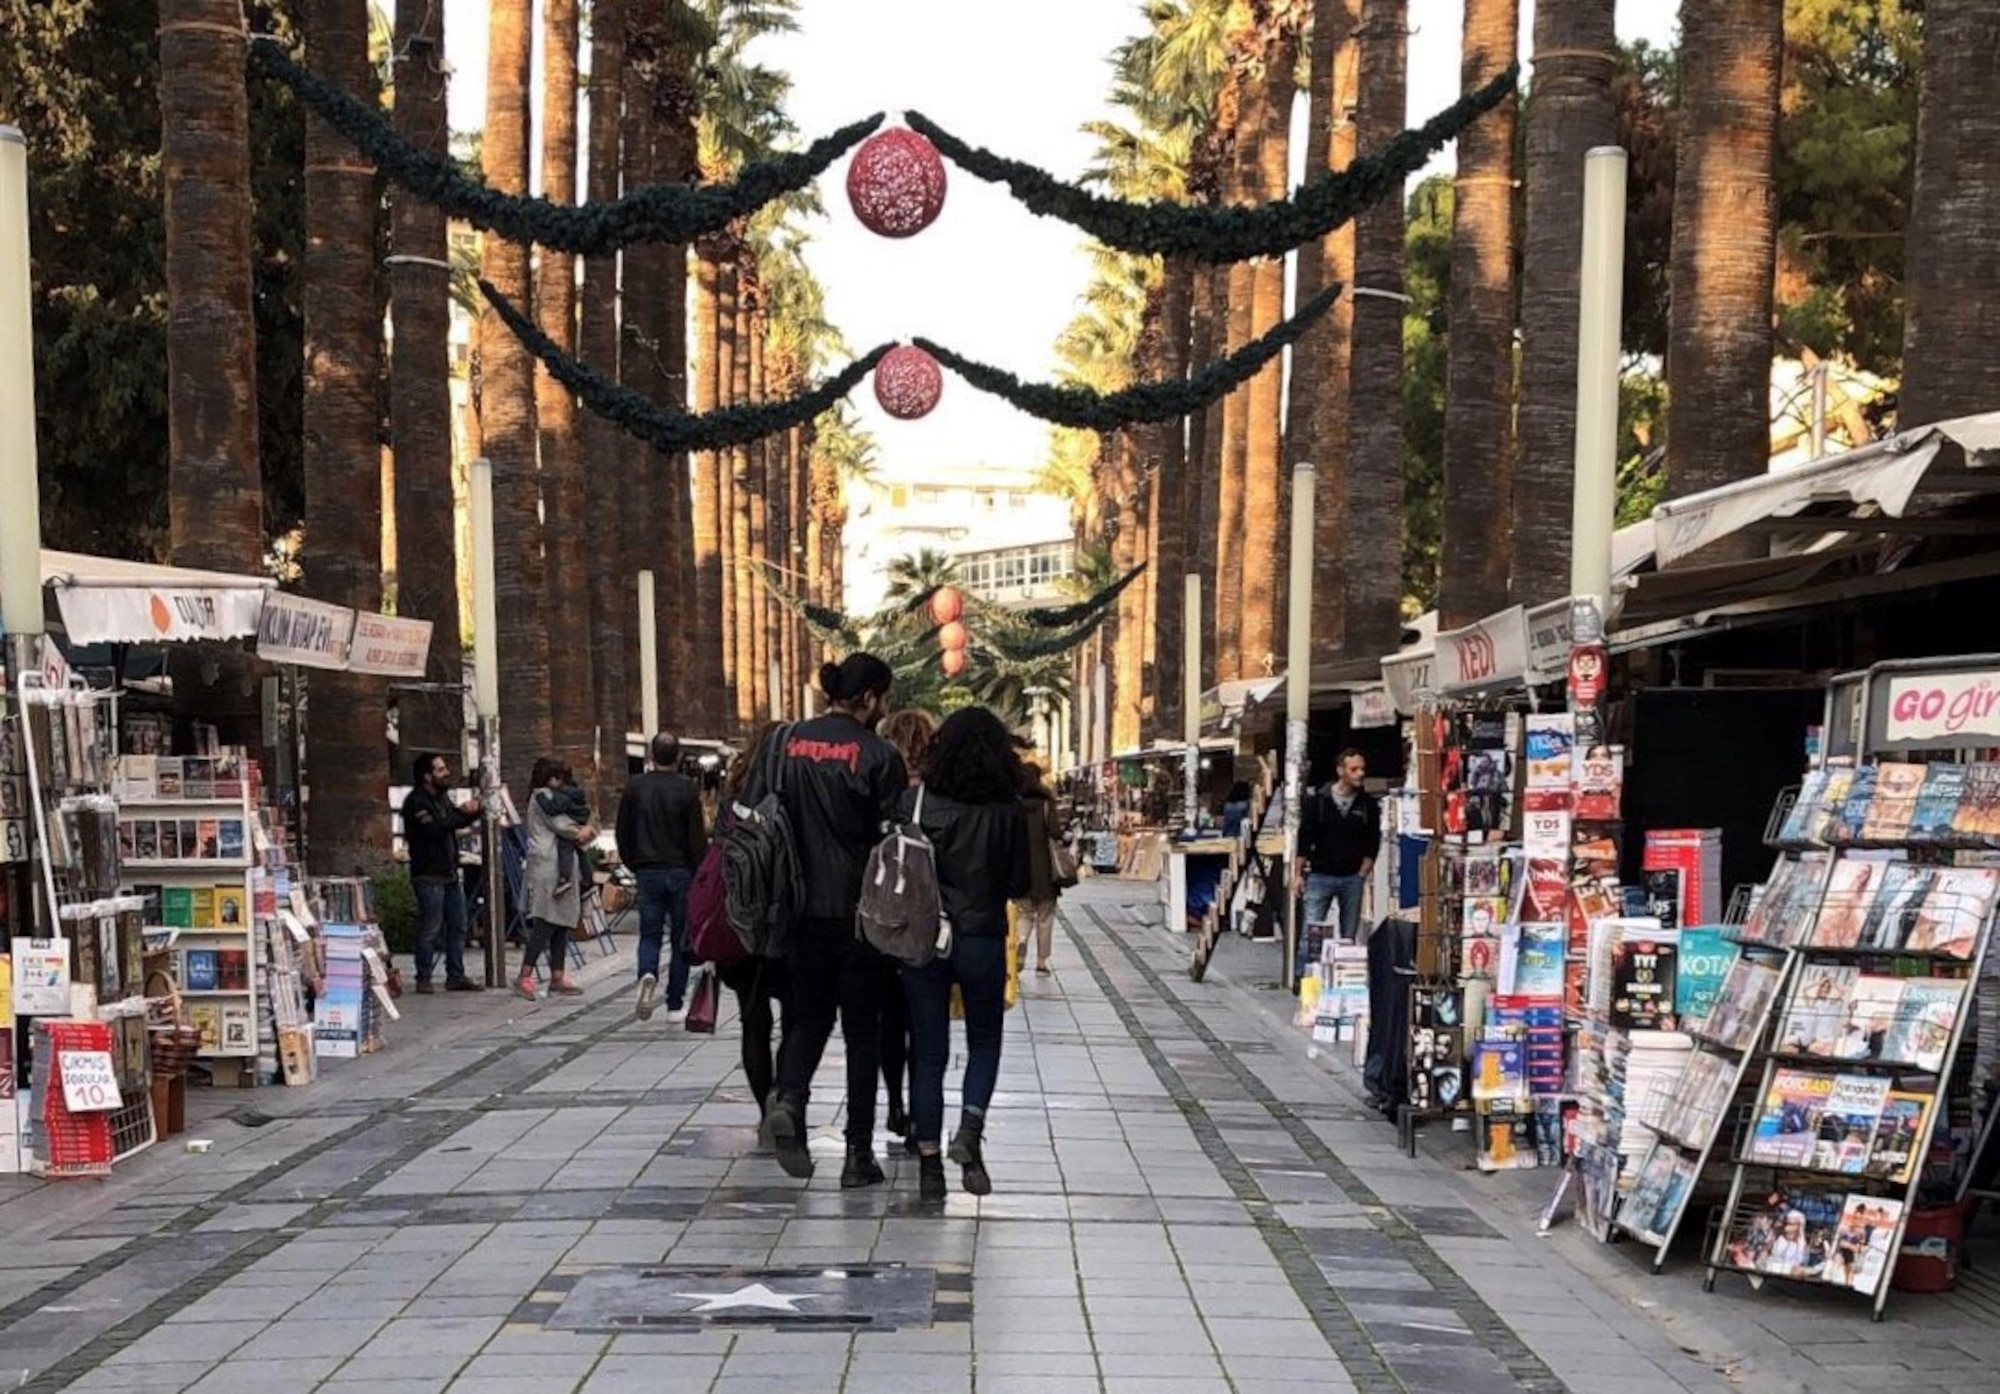 Individuals walk through Lover’s Lane in Izmir, Turkey, March 22, 2019. A quiet pedestrianized road filled with markets, Lover’s Lane is also lined with stars and names of Turkish celebrities. (Courtesy photo)